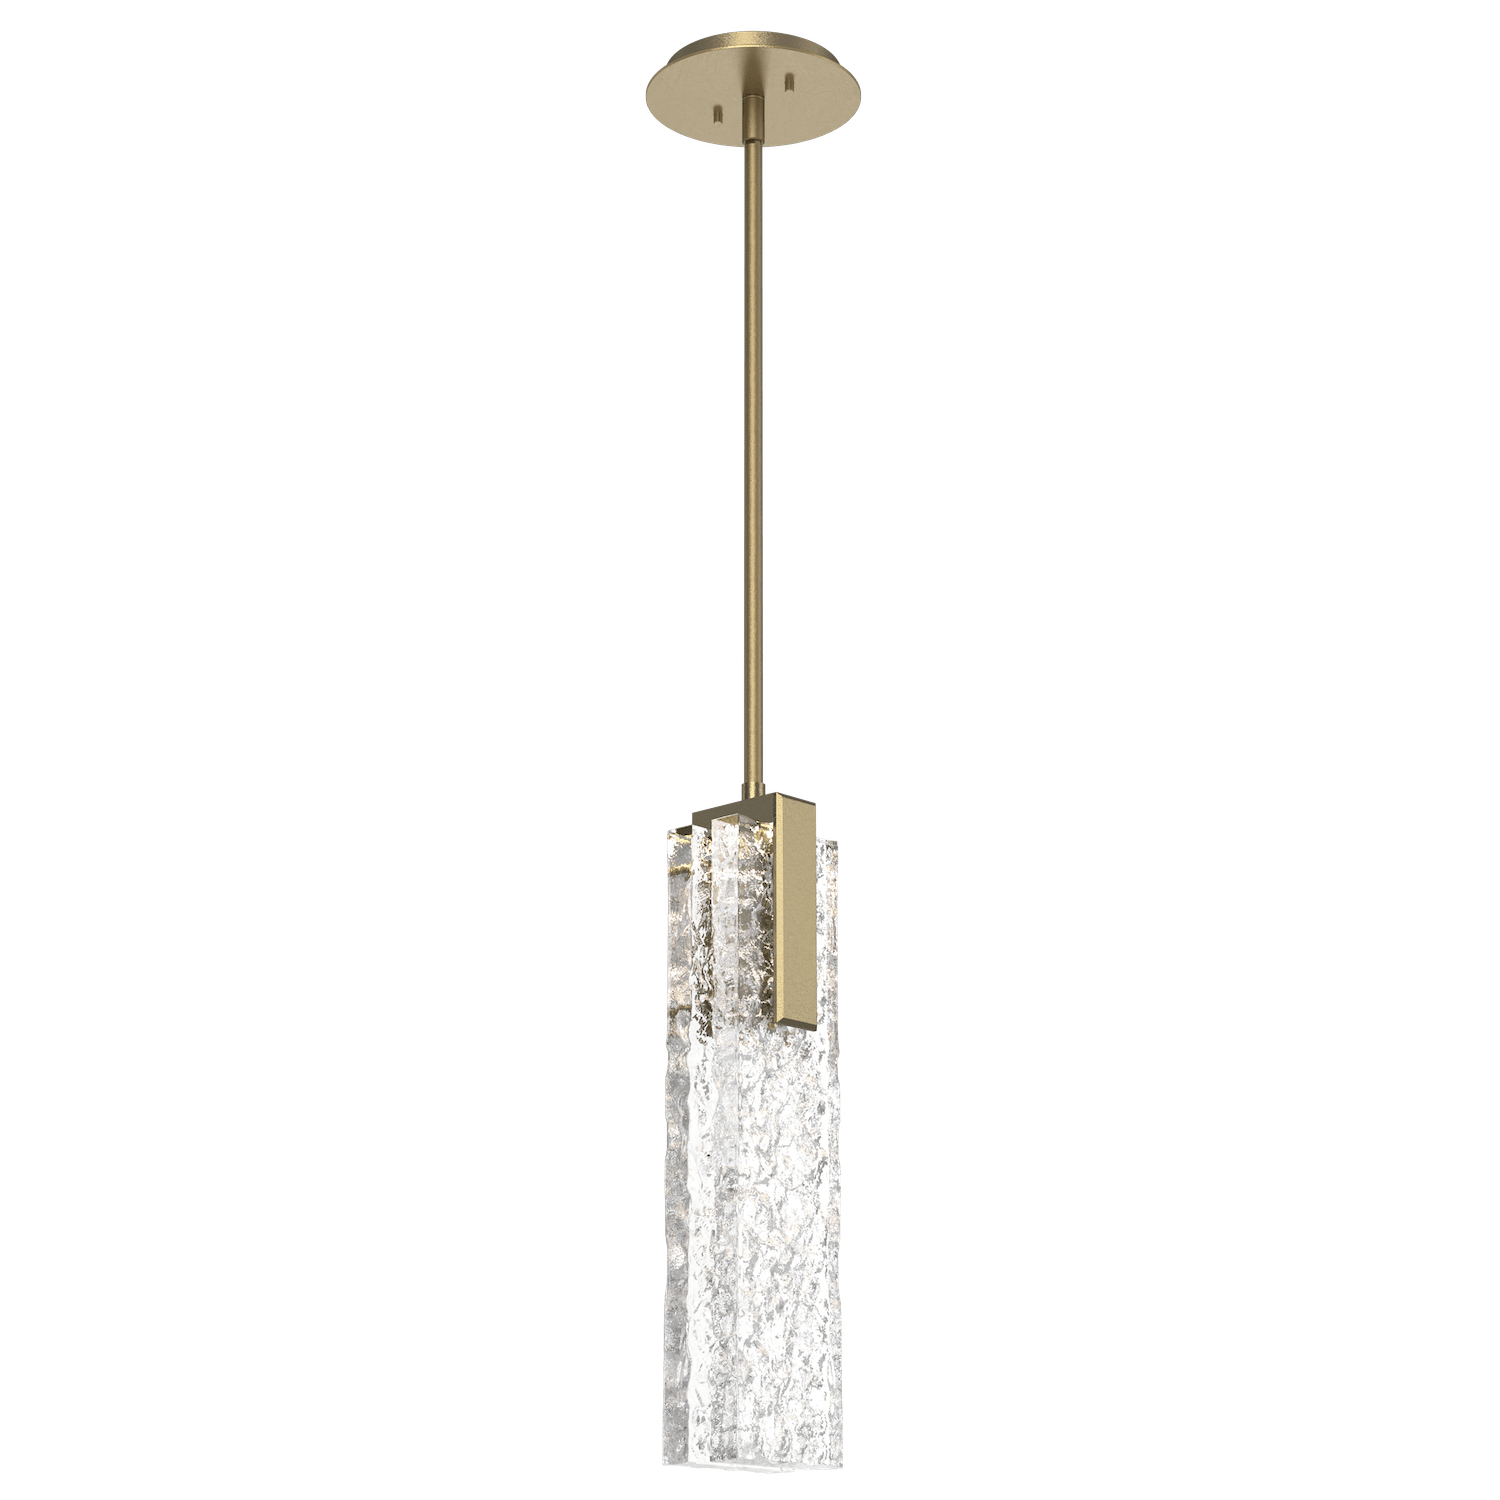 LAB0061-17-GB-GC-Hammerton-Studio-Glacier-pendant-light-with-gilded-brass-finish-and-clear-blown-glass-with-geo-clear-cast-glass-diffusers-and-LED-lamping